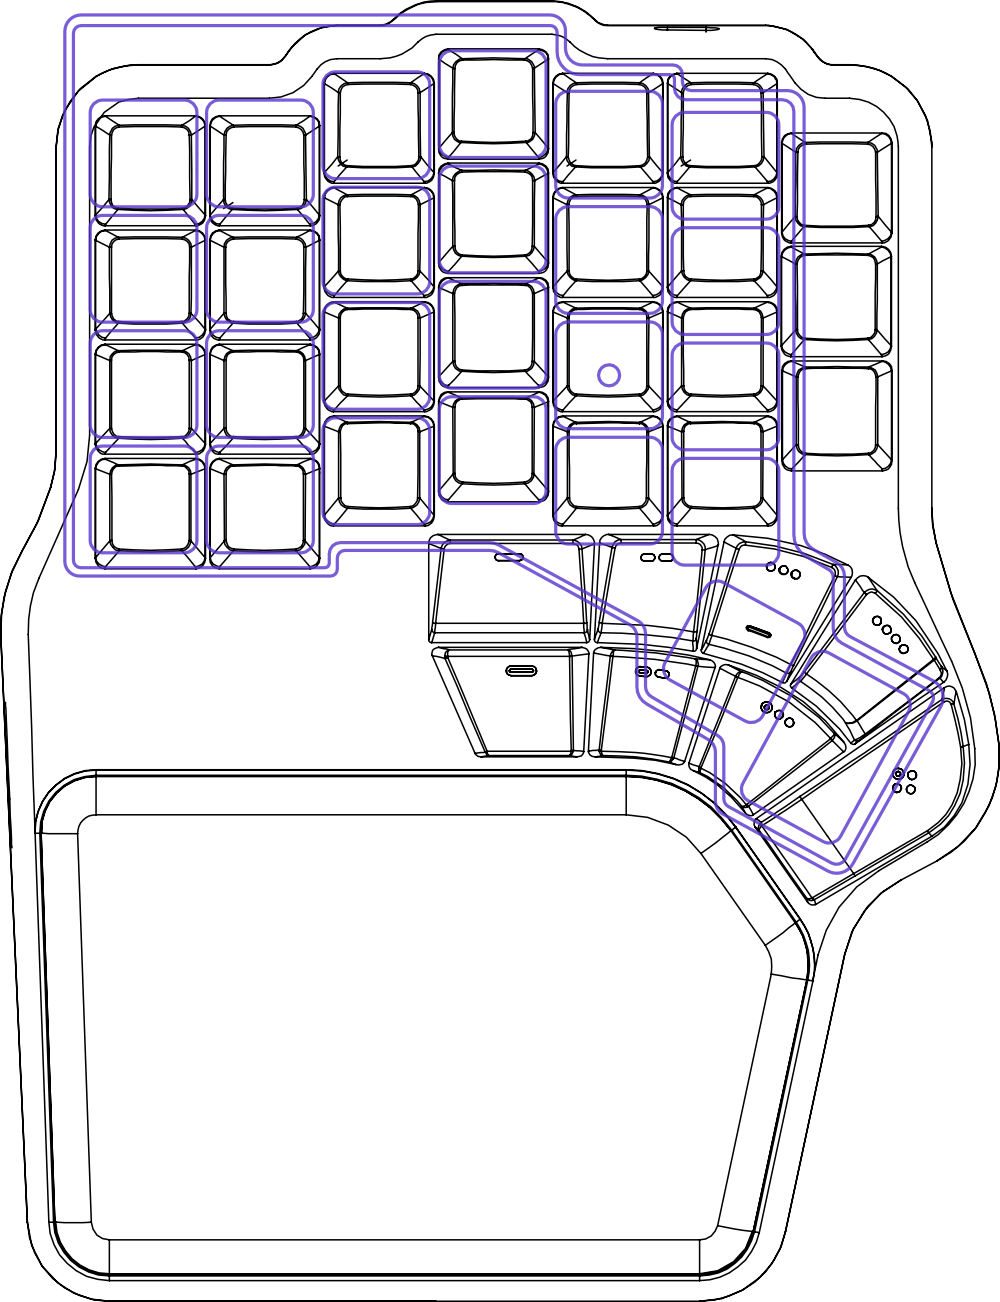 Voyager layout compared to the Dygma Defy